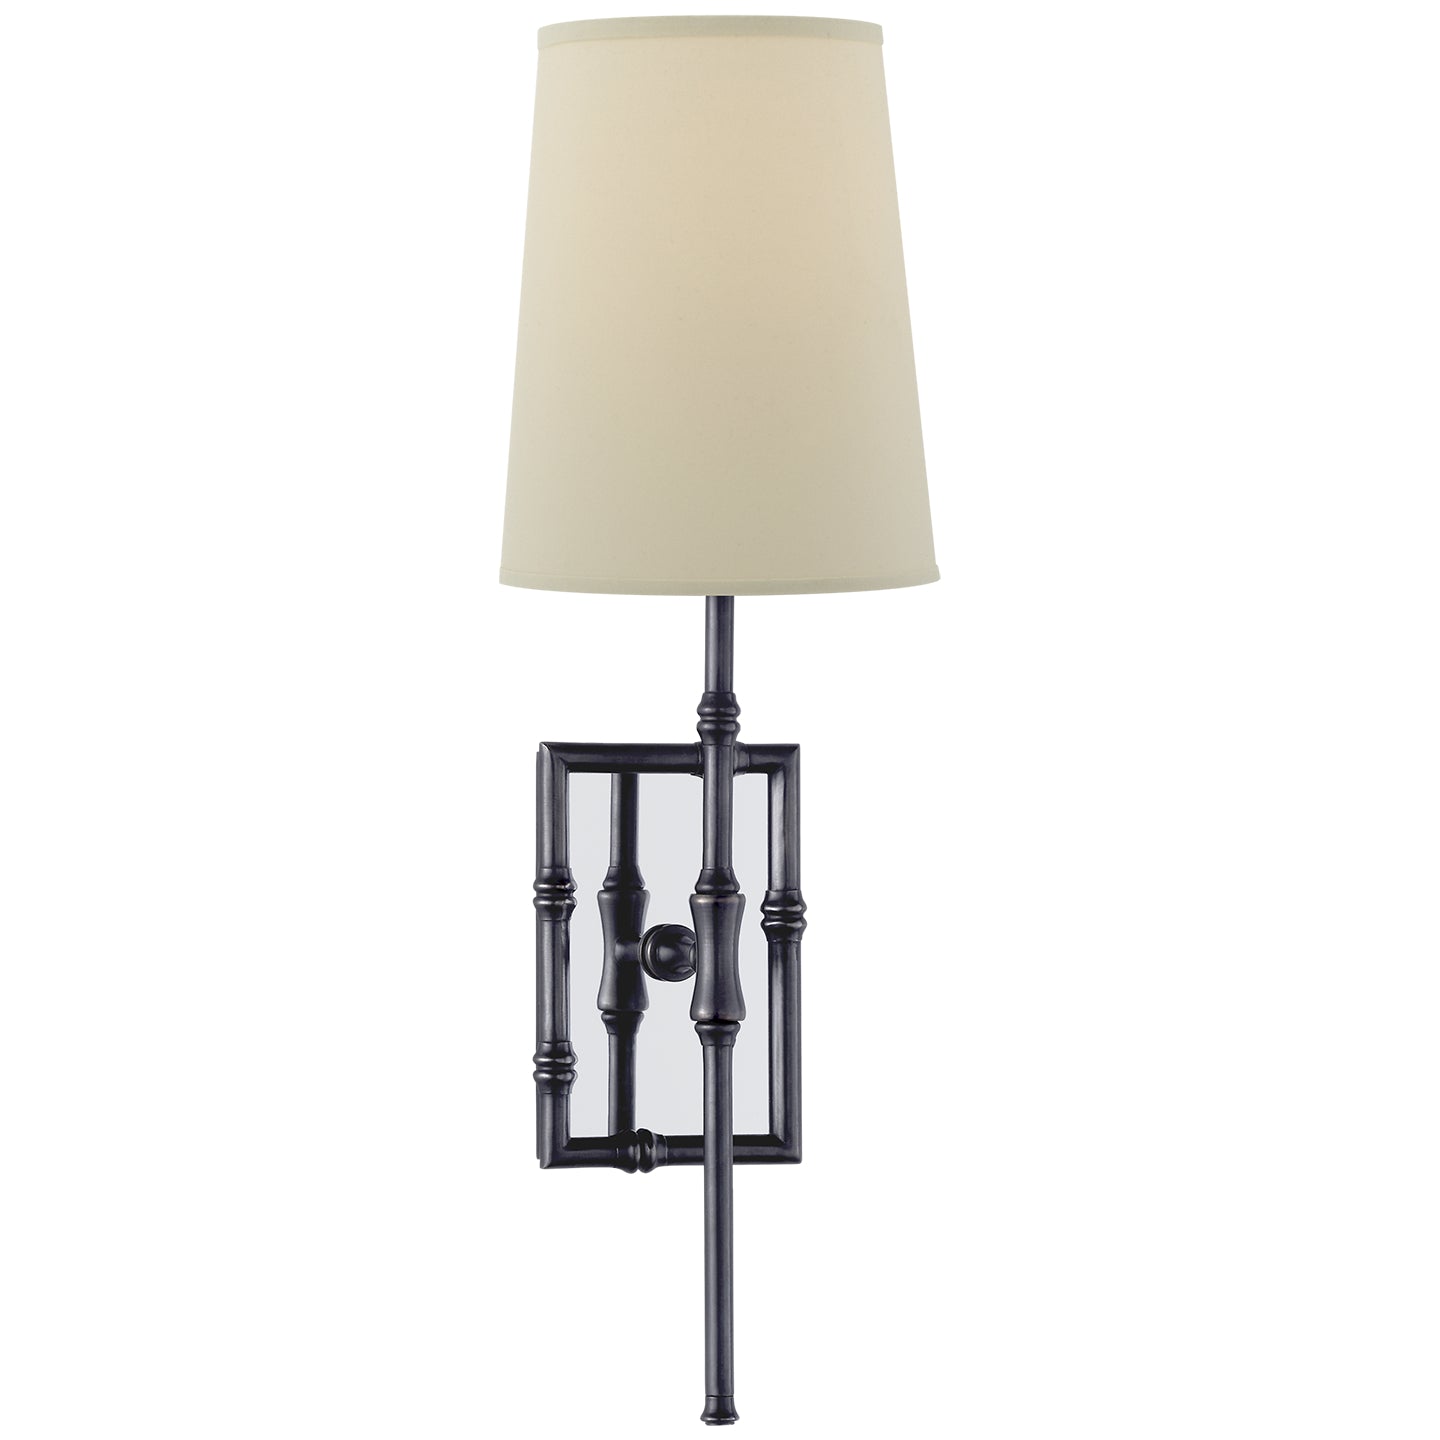 Load image into Gallery viewer, Visual Comfort Signature - S 2177BZ-PL - One Light Wall Sconce - Grenol - Bronze
